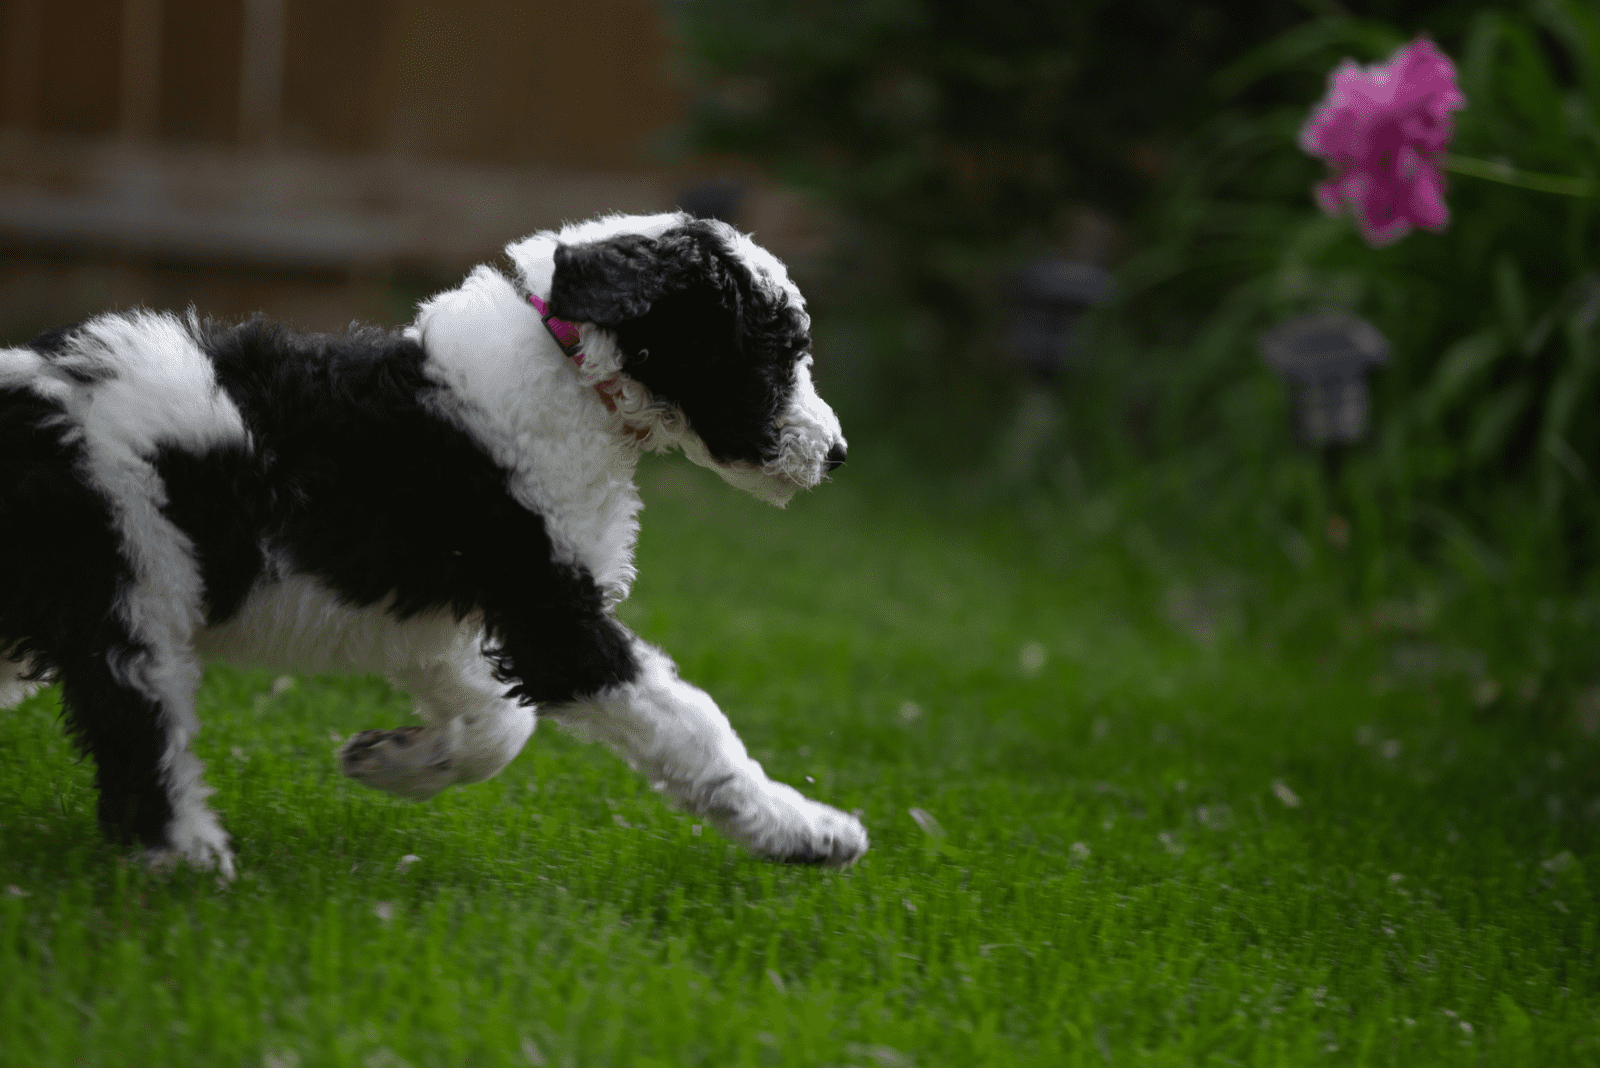 Sheepadoodle is playing in the garden